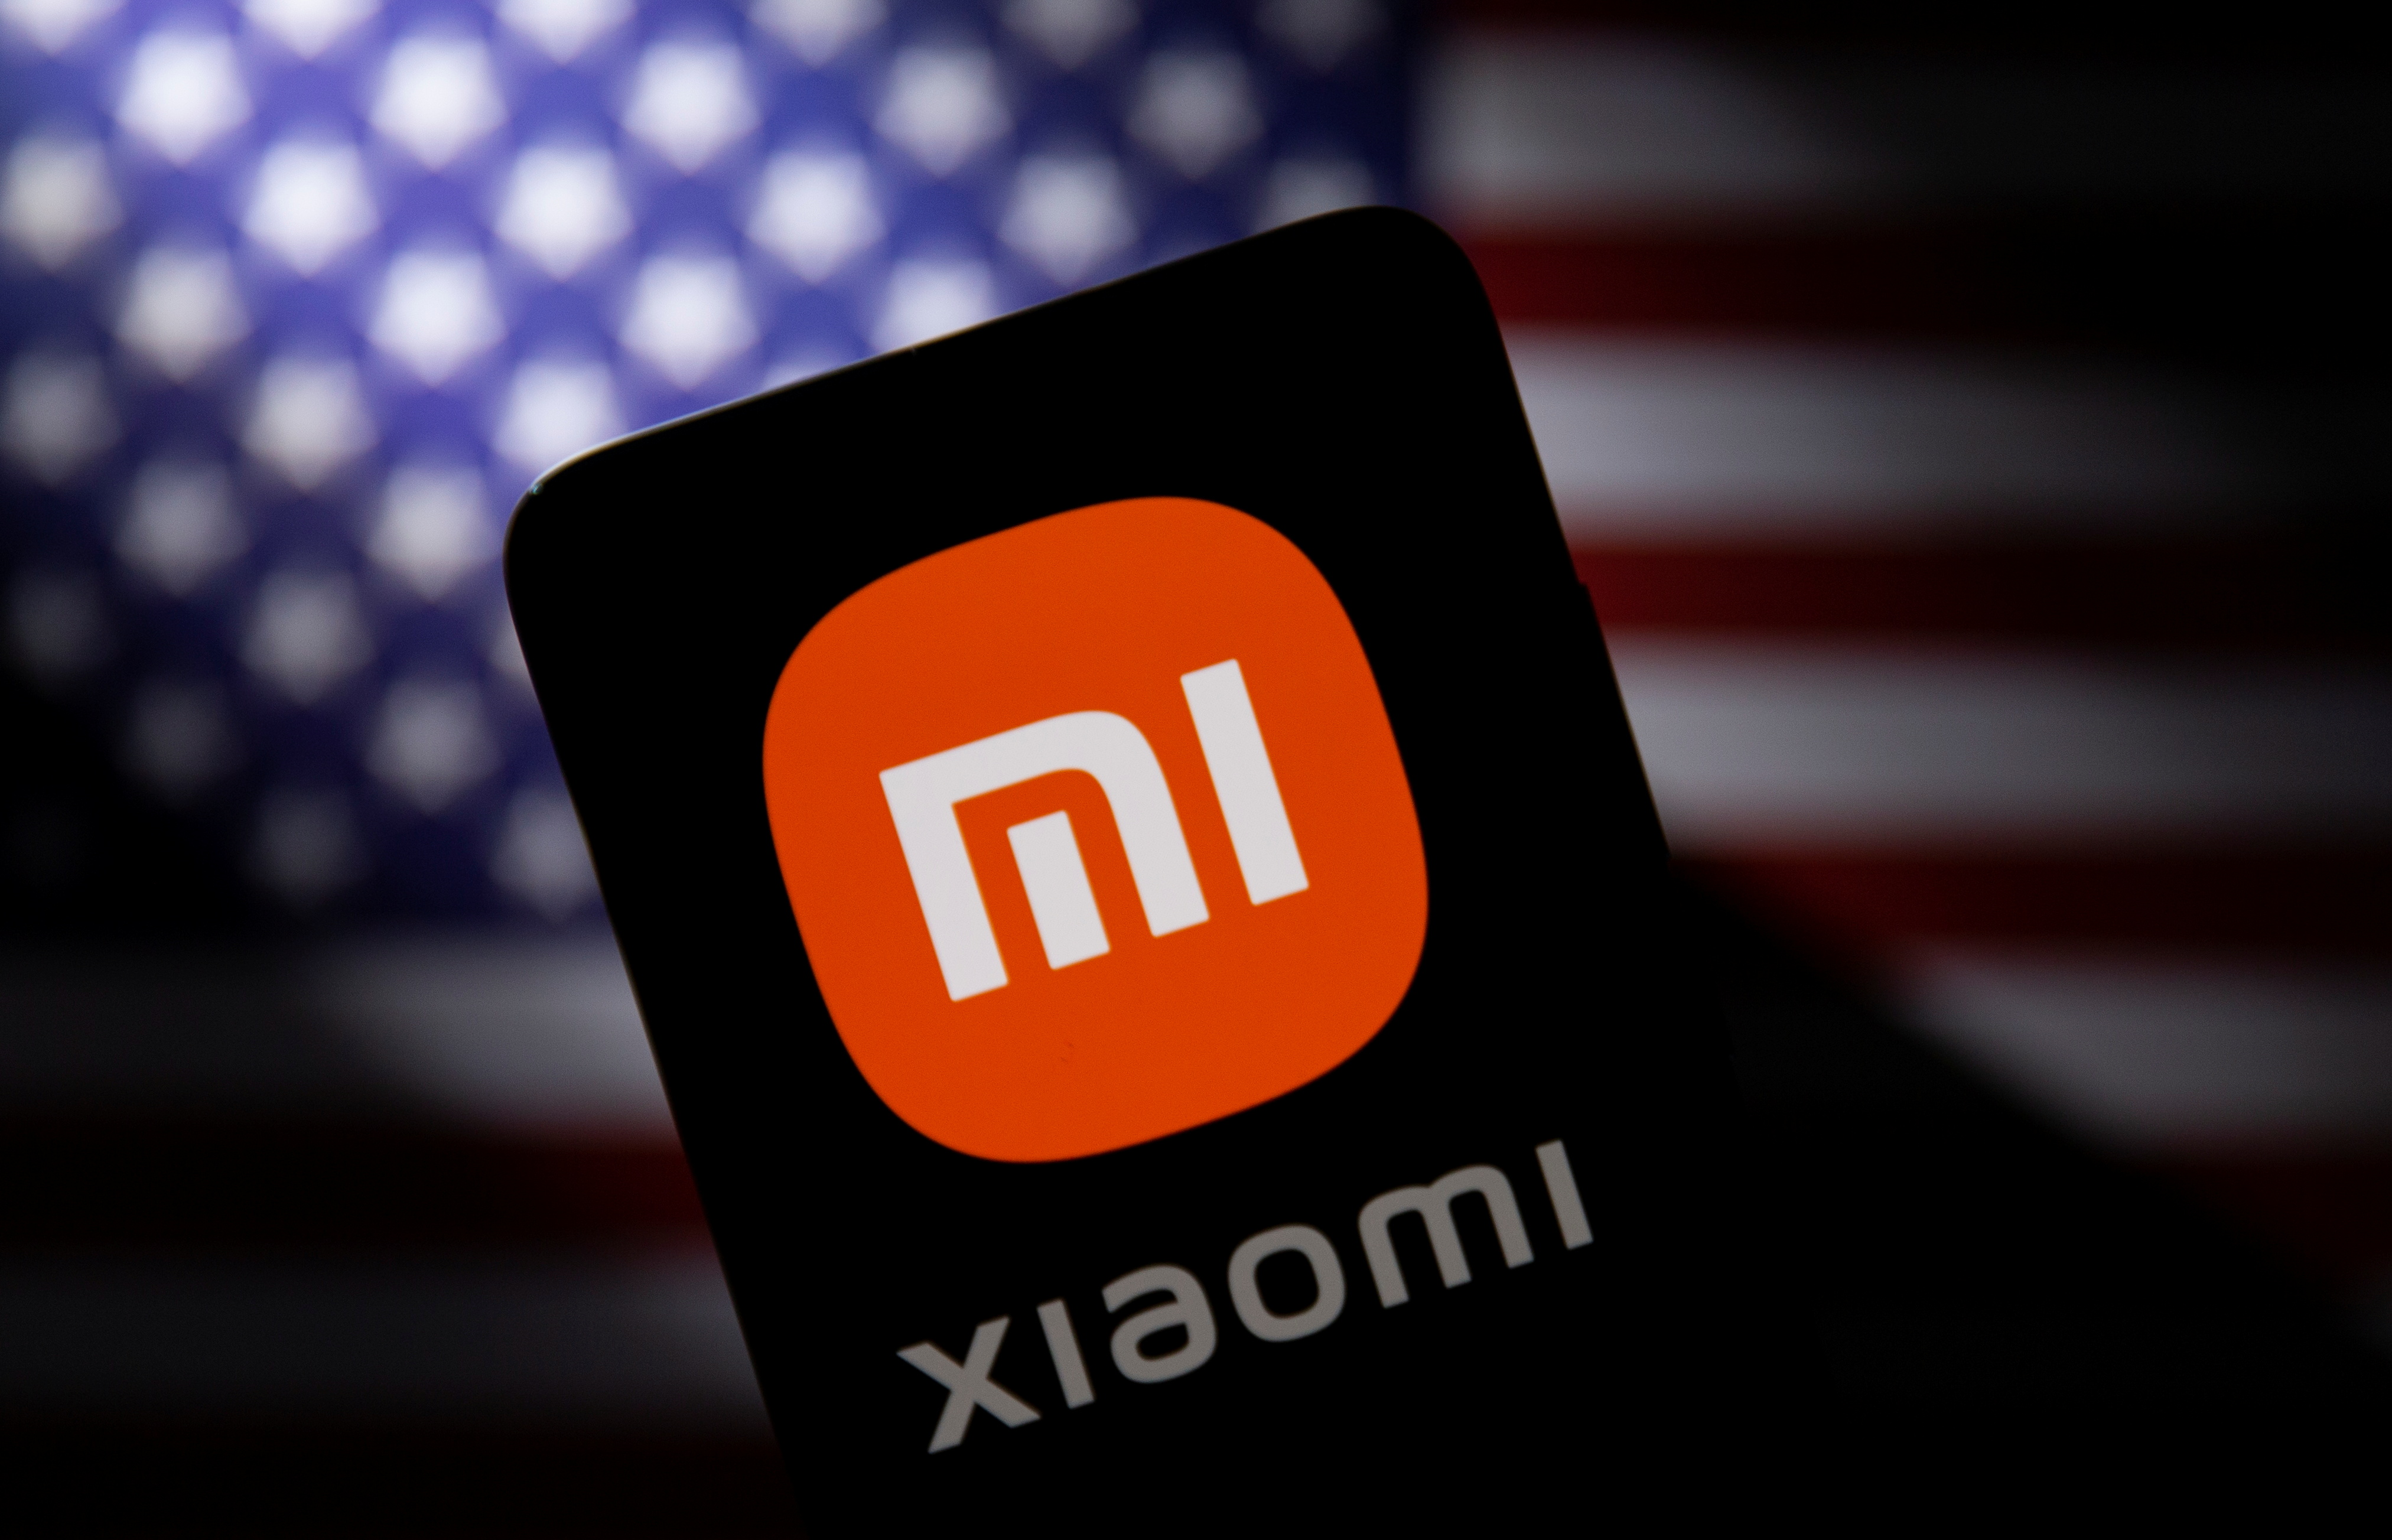 Smartphone with a Xiaomi logo is seen in front of U.S. flag in this illustration